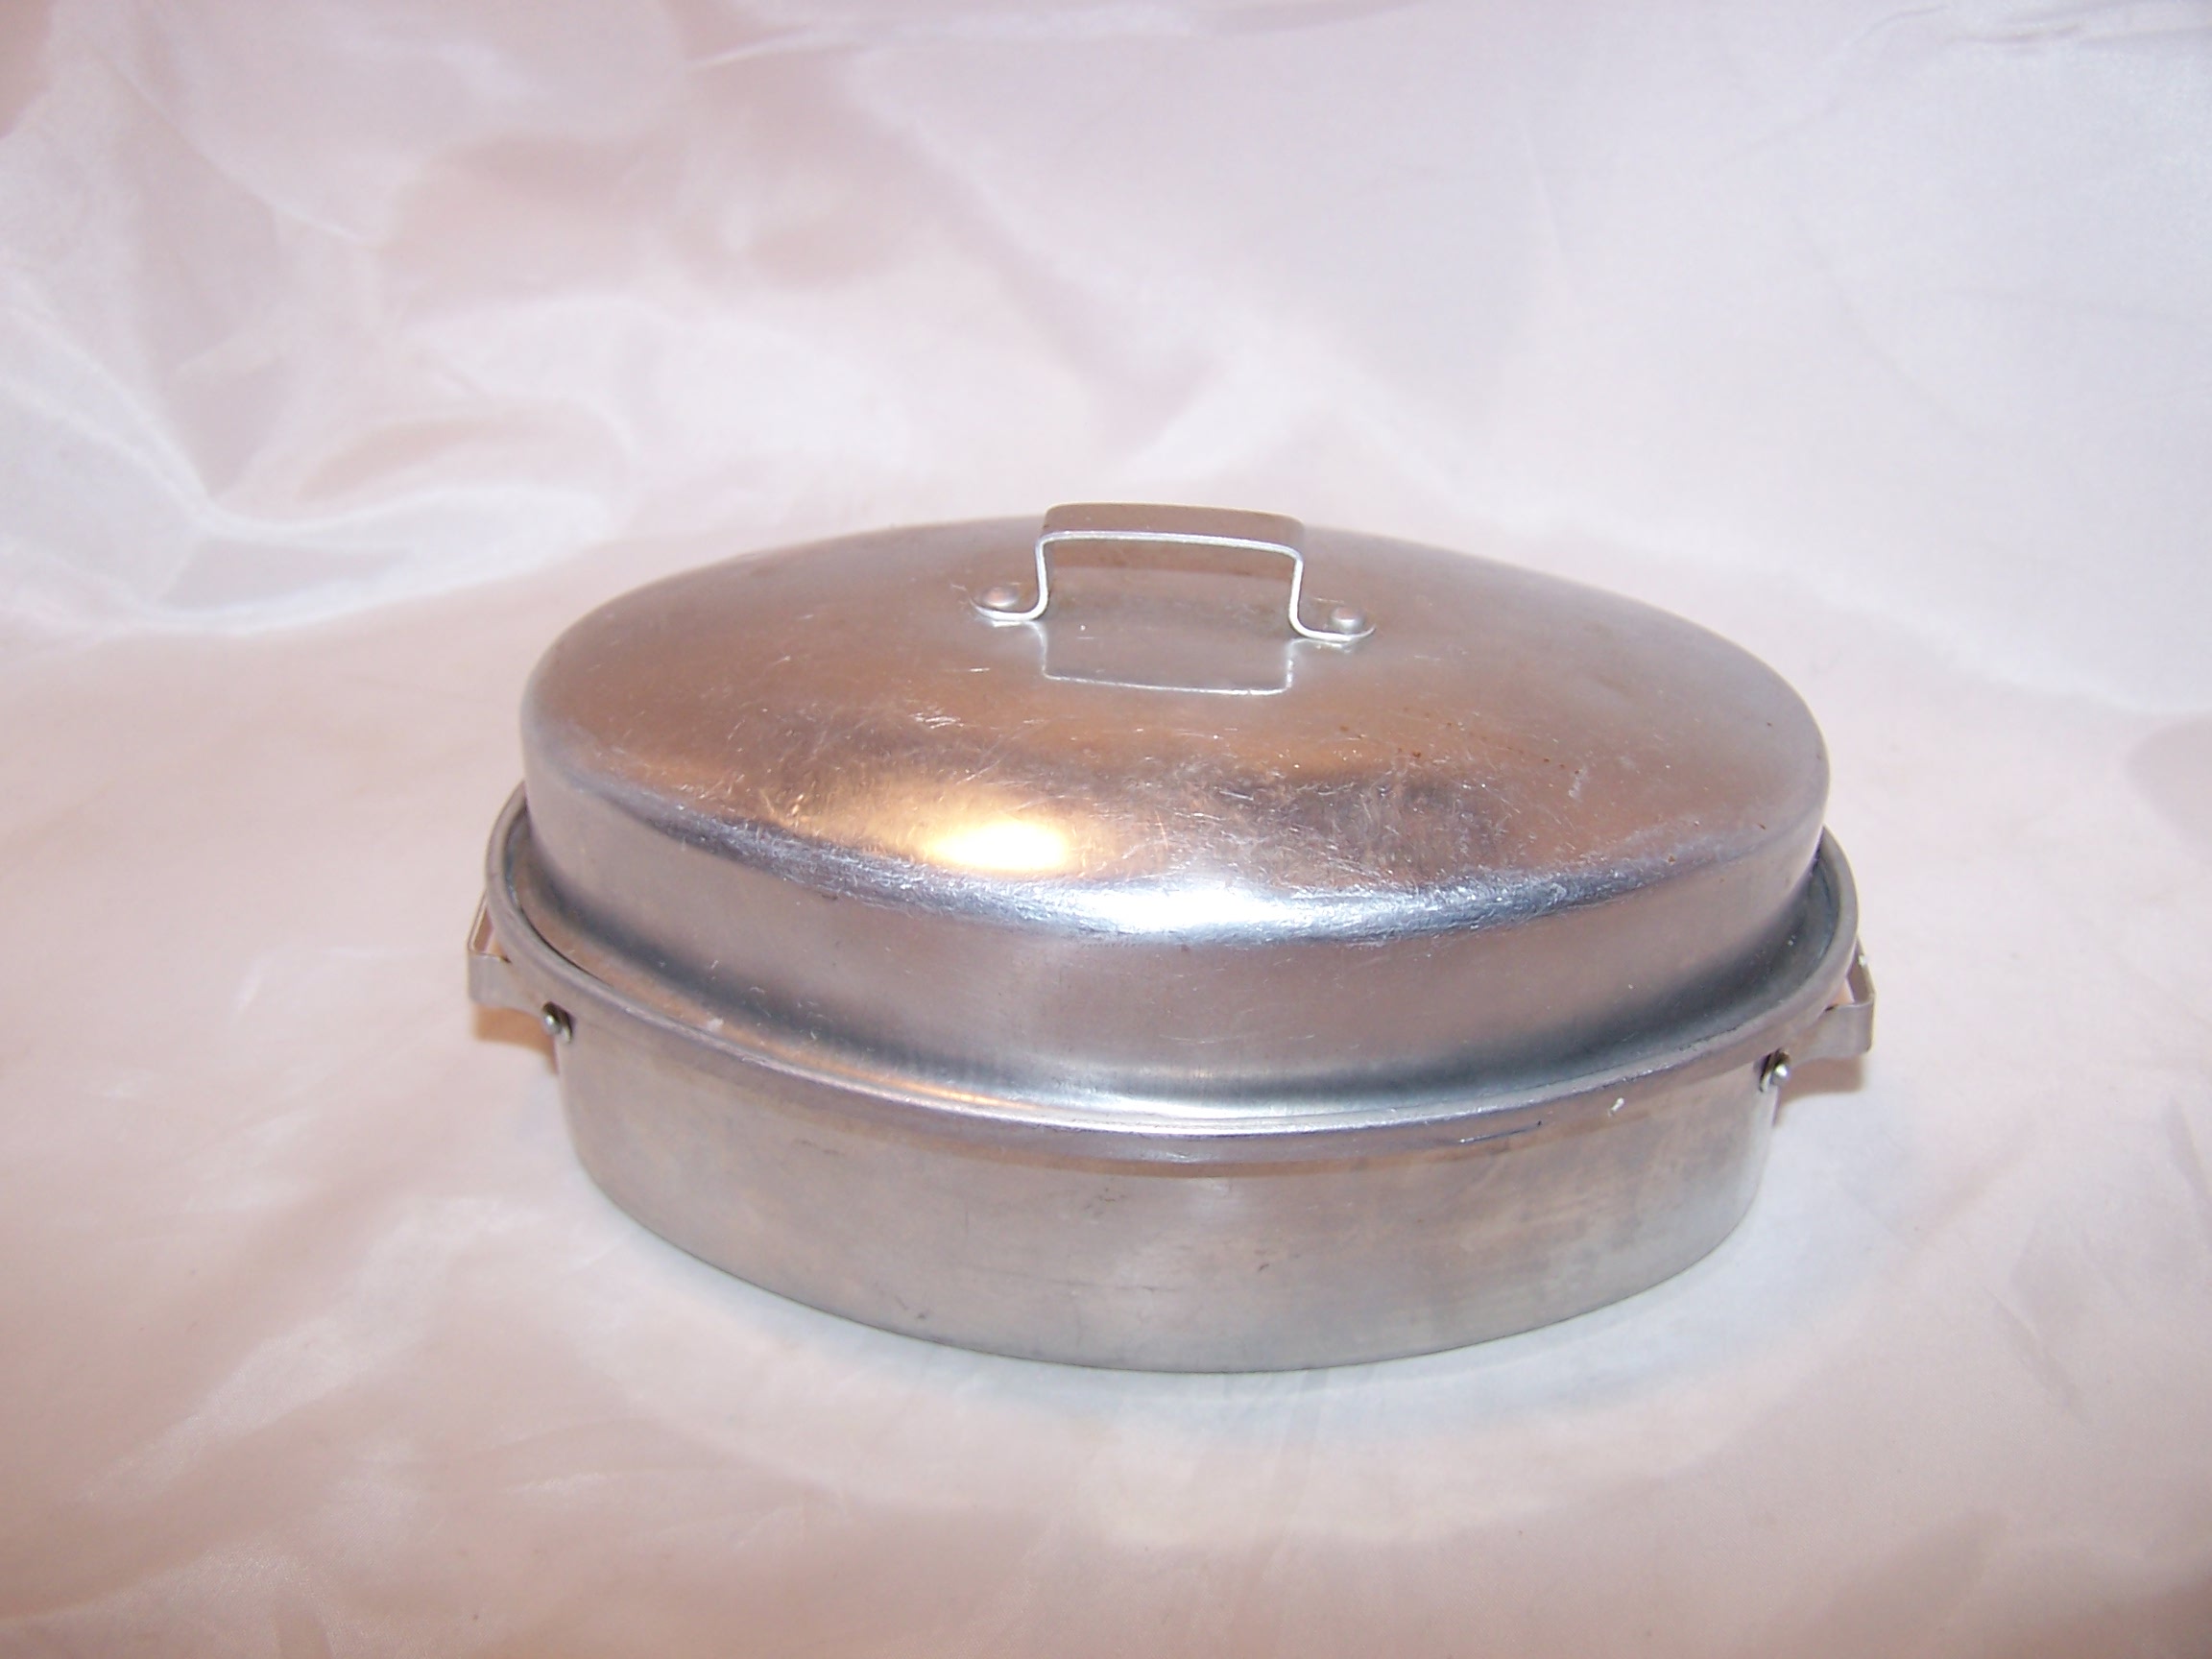 Toy Roaster w Lid, Aluminum, Vintage Childs Toy